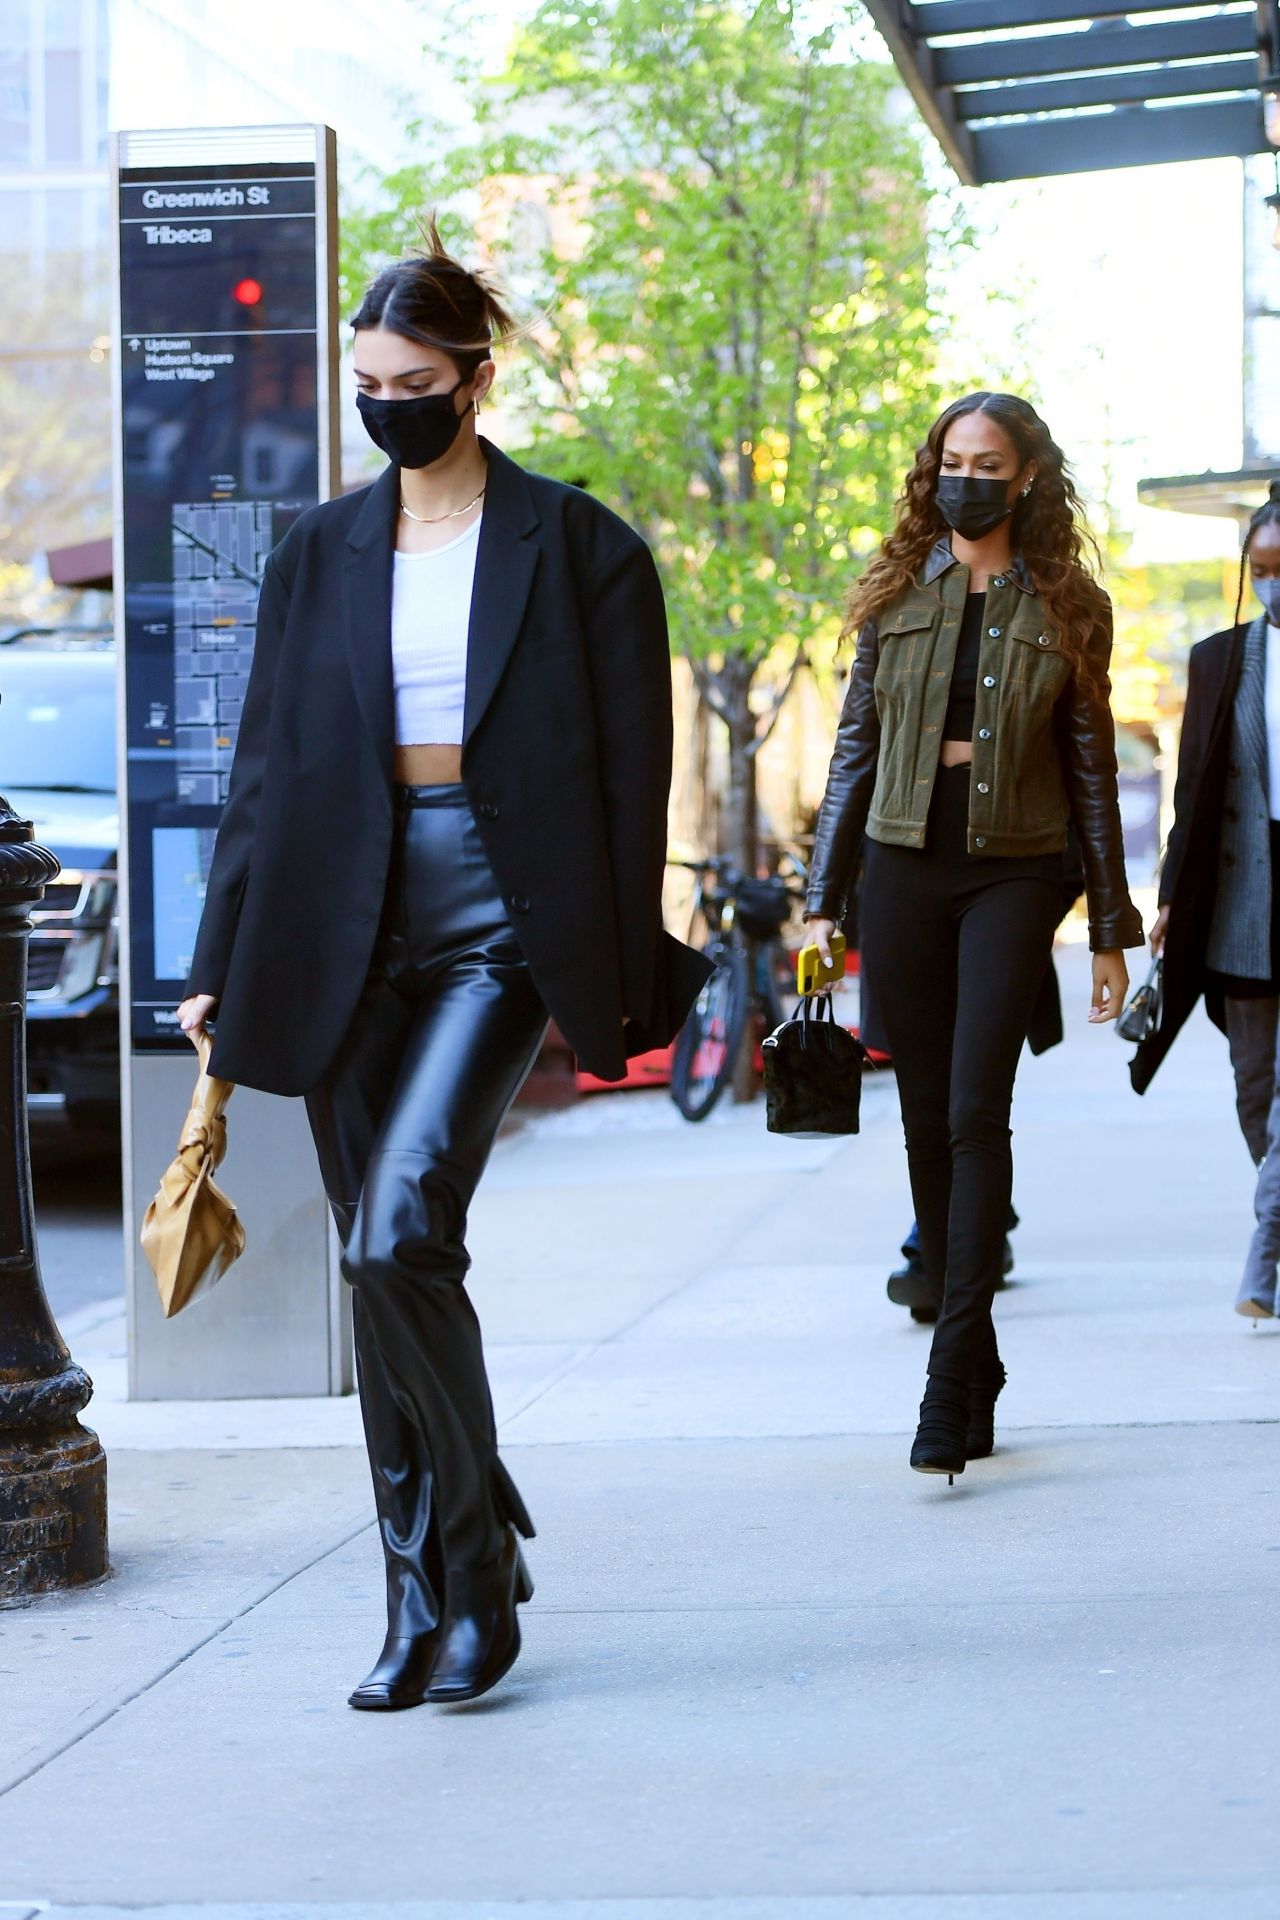 Kendall Jenner and Joan Smalls - Out in New York 04/26/2021 • CelebMafia